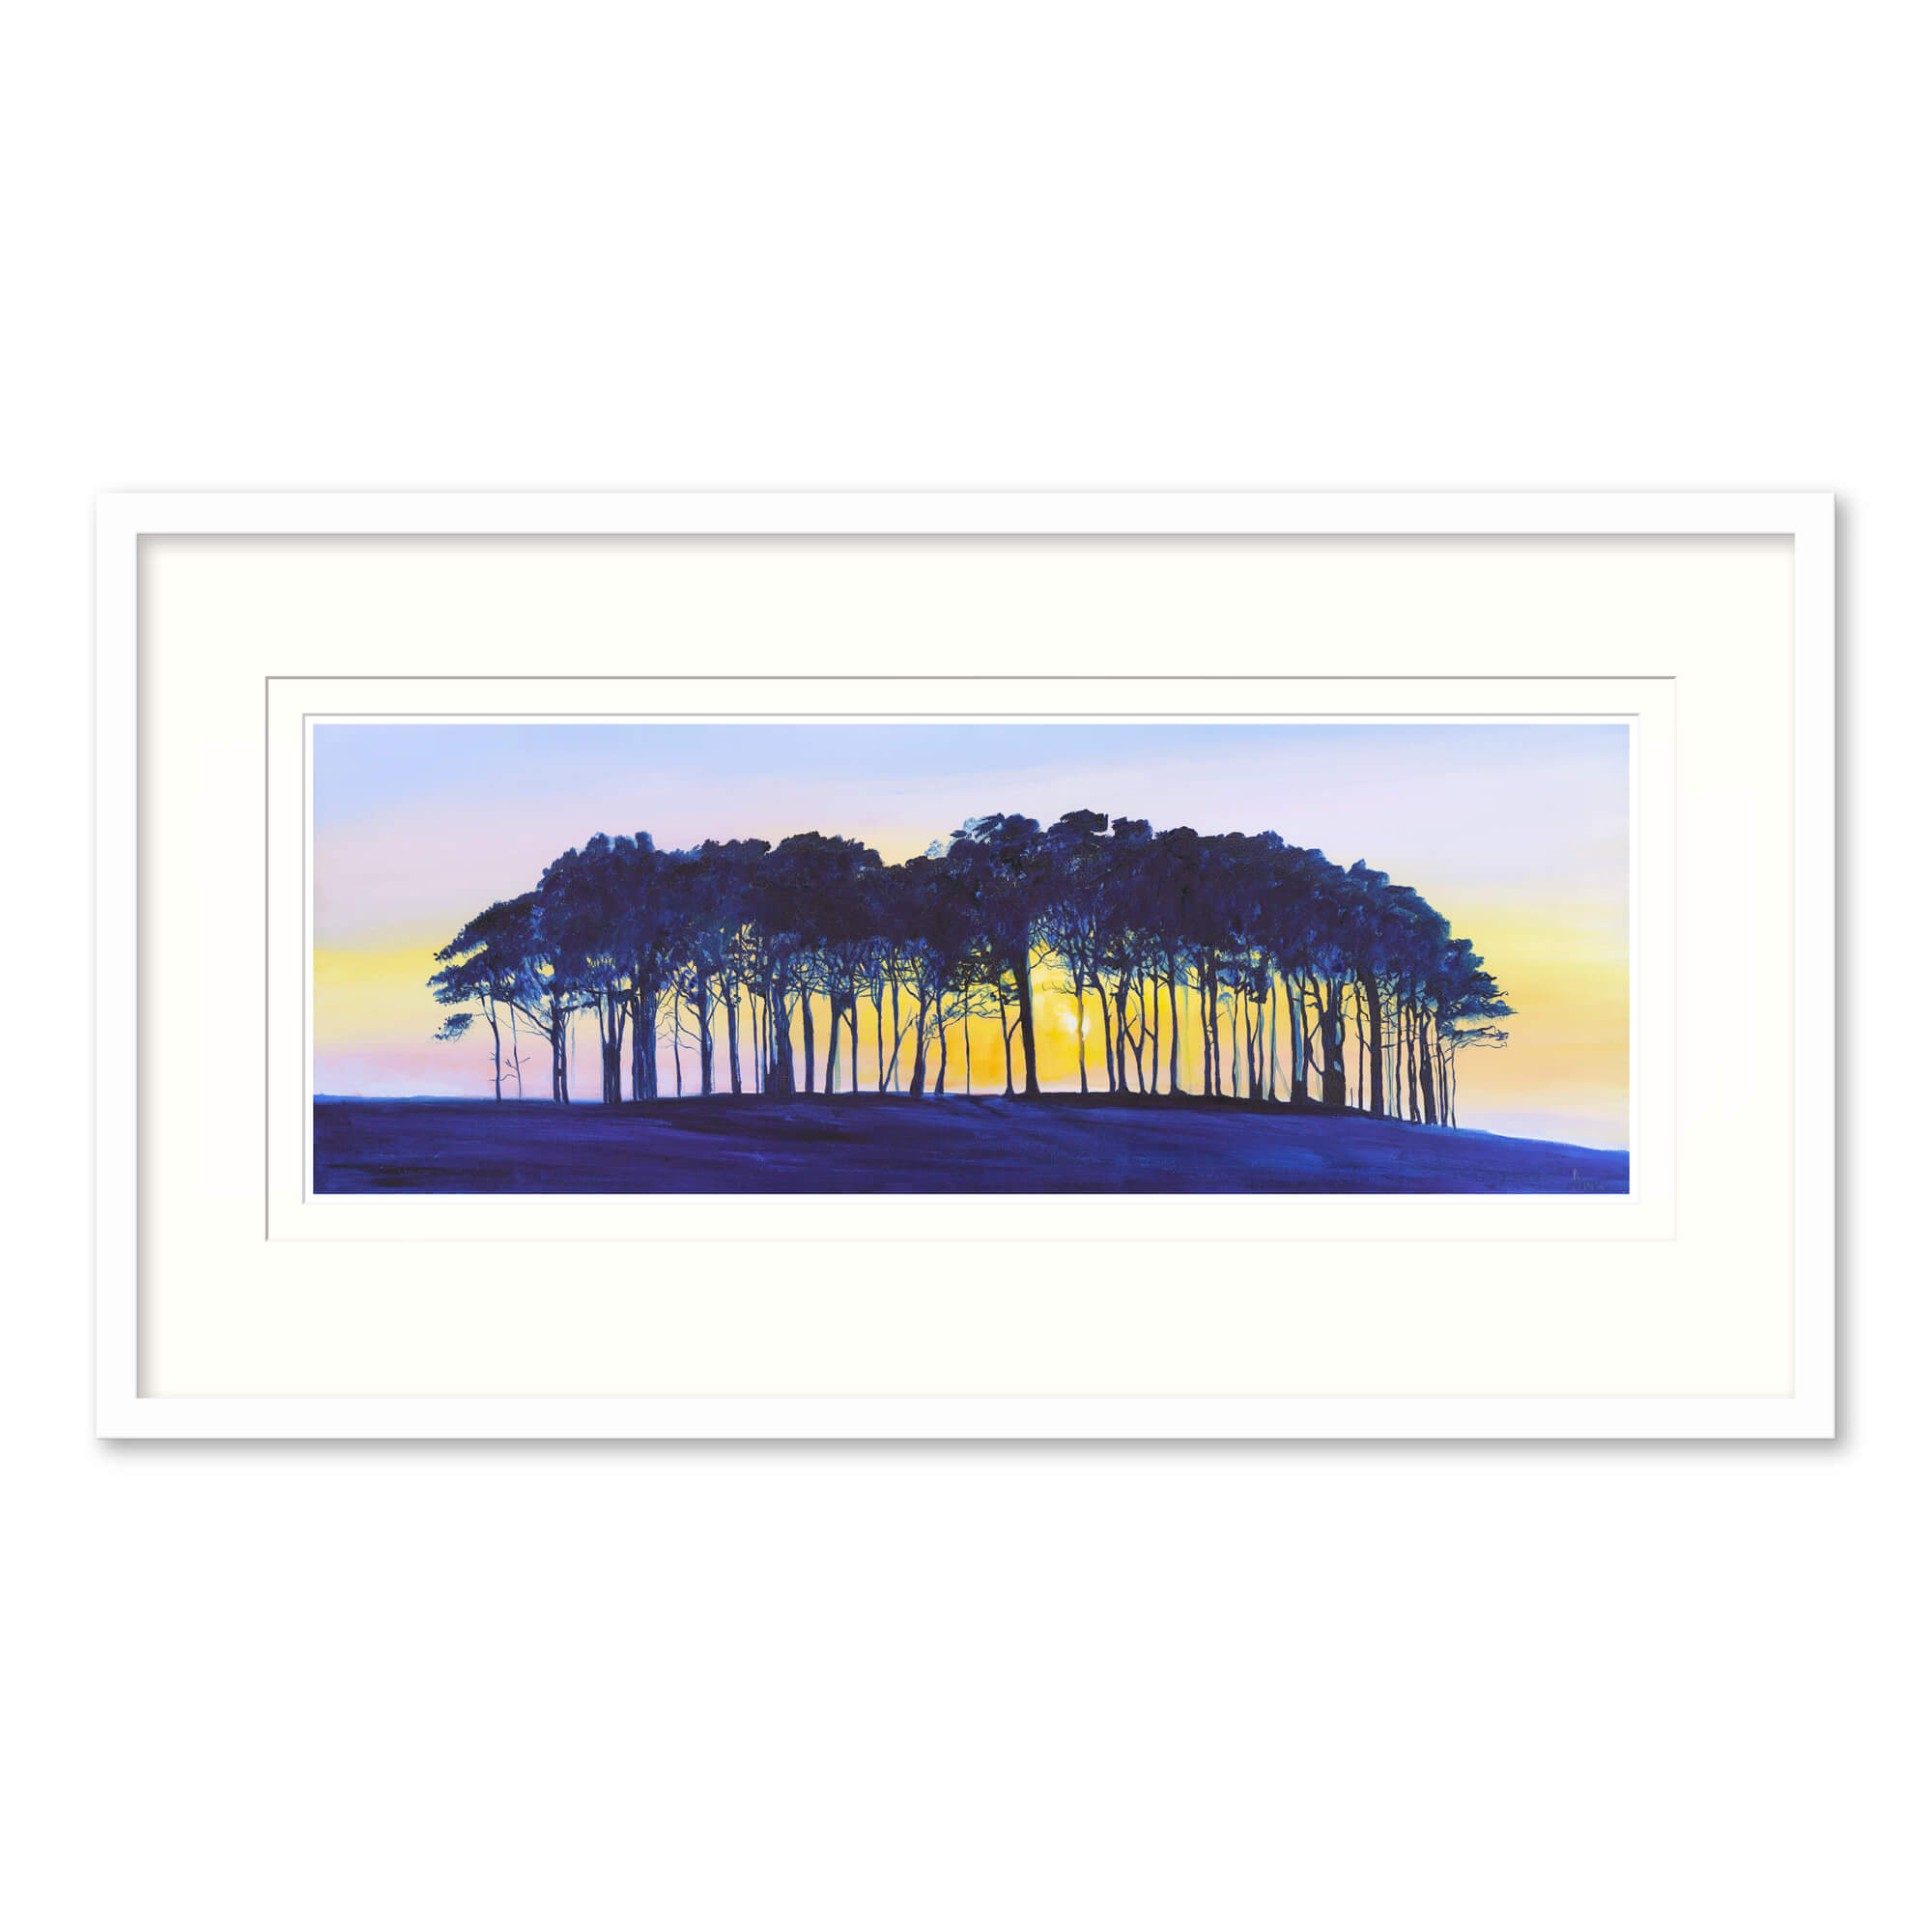 A New Day, Cooksworthy Knapp Framed Print